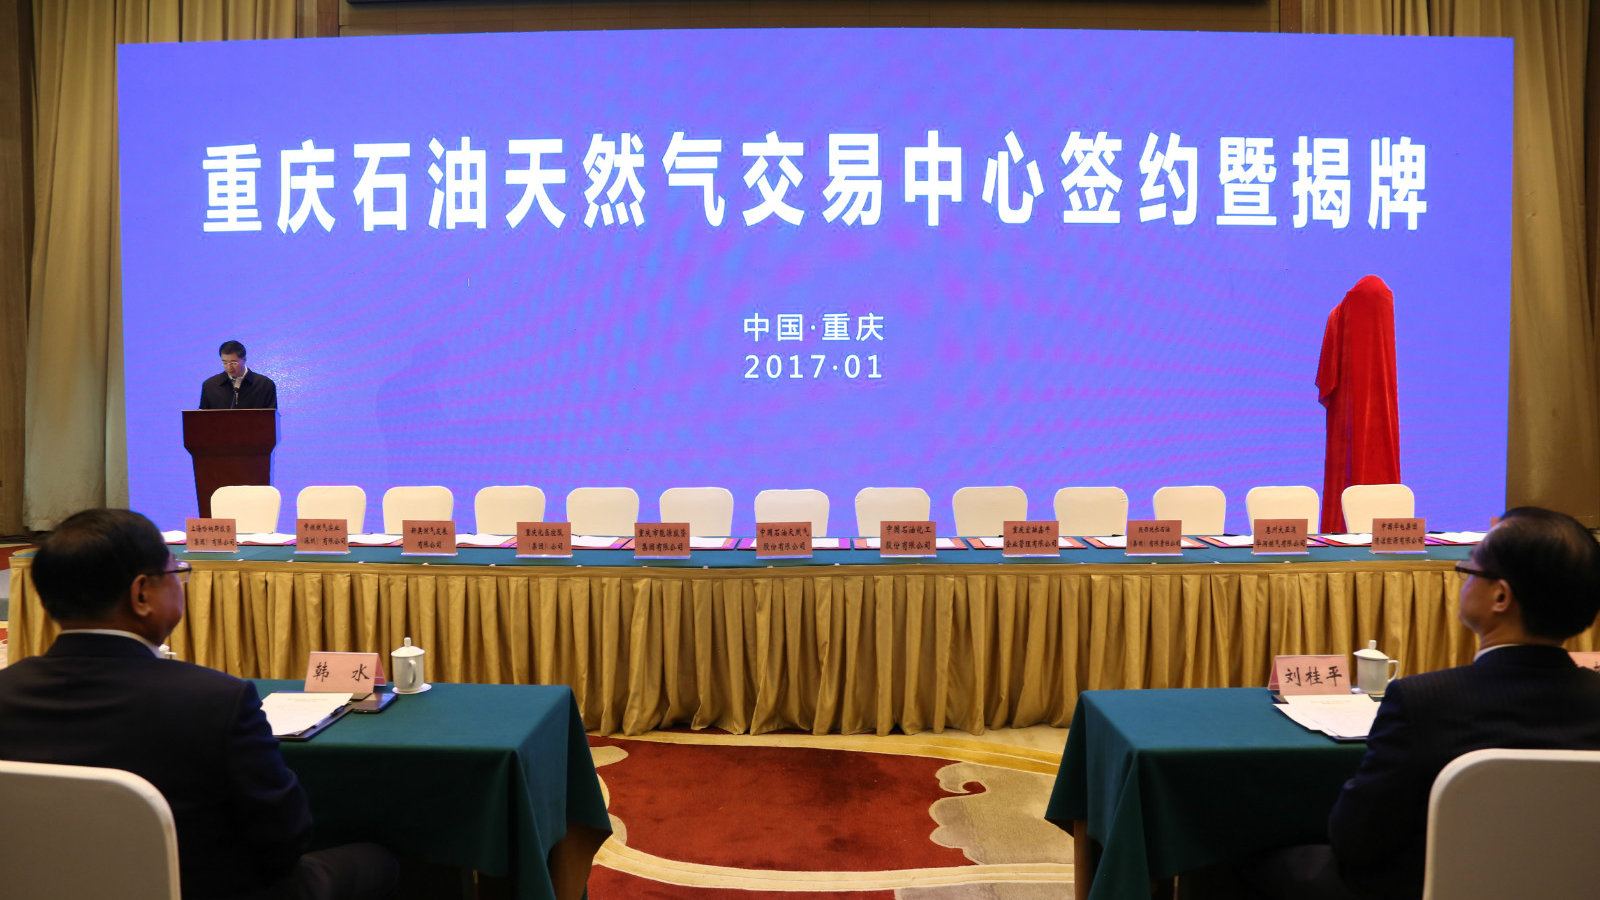 Chongqing Oil and Gas Trading Center is Founded and Hanas Group Attends the Ceremony as a Stockholder